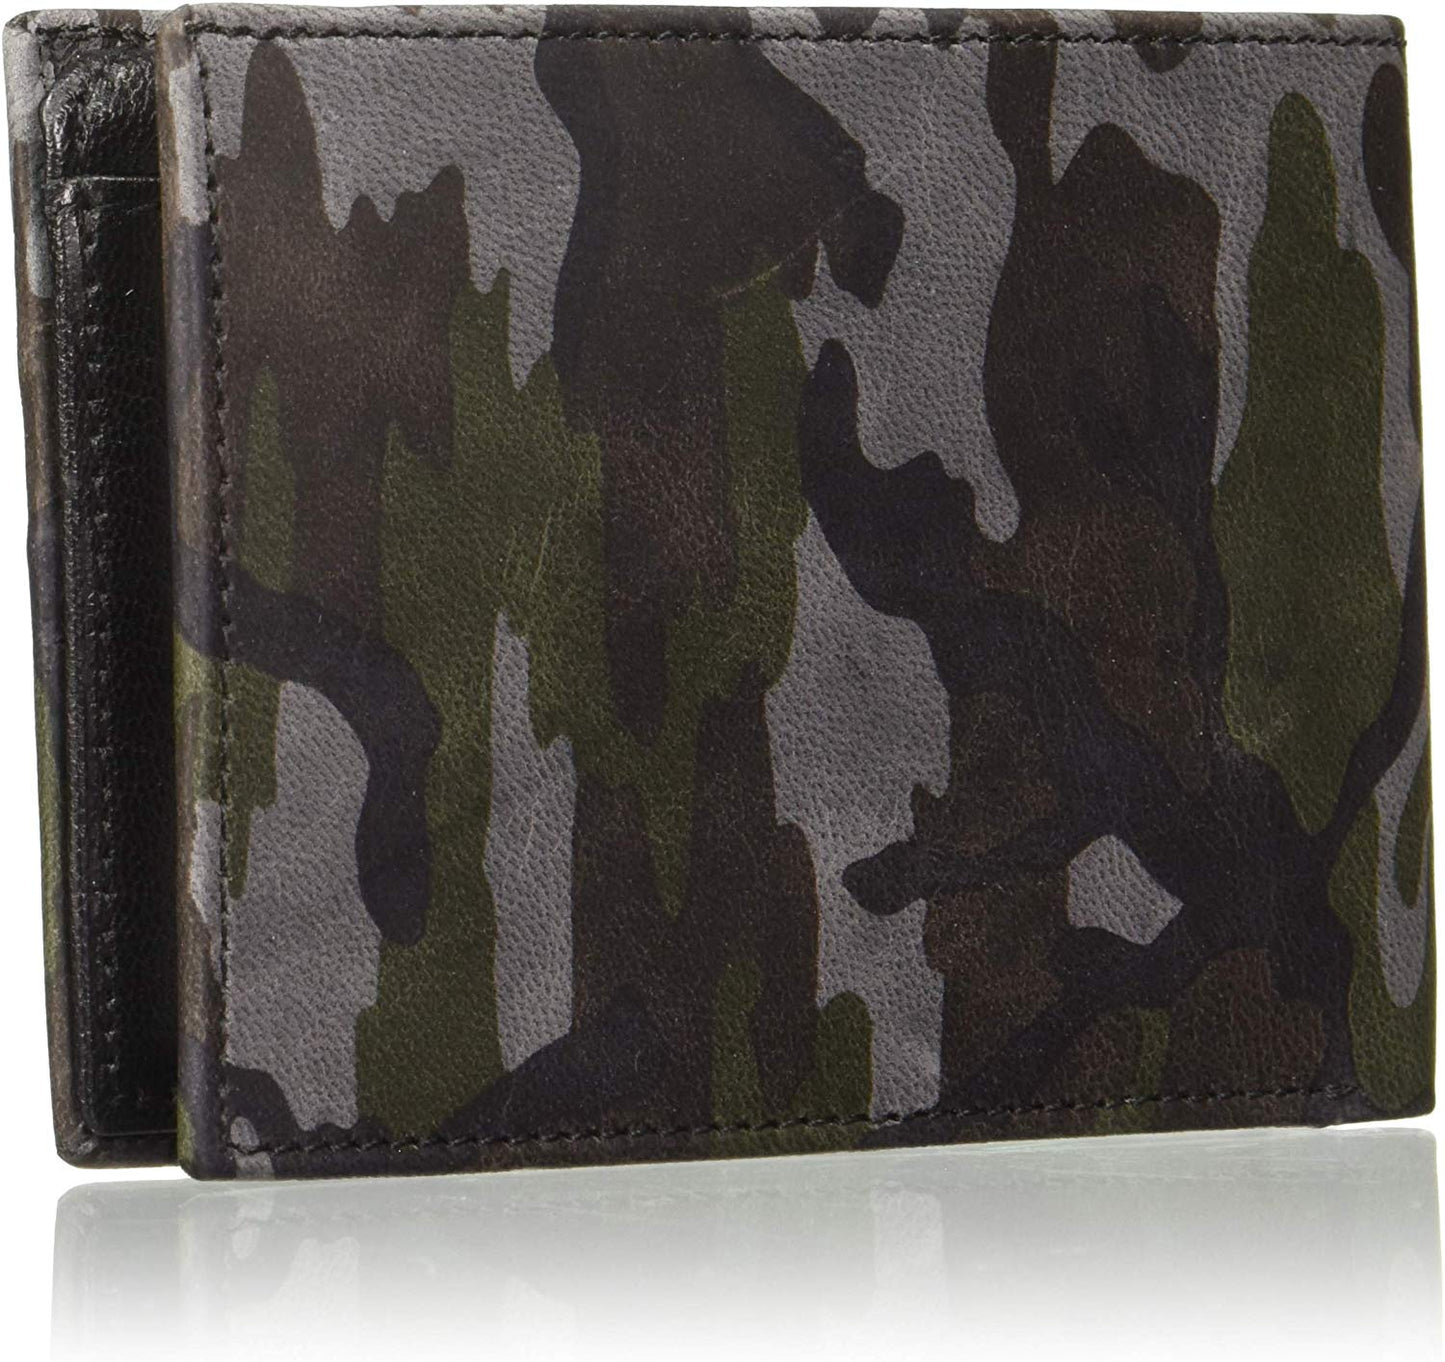 Cathy London Limited Edition RFID Men's Wallet 8 Card Slots